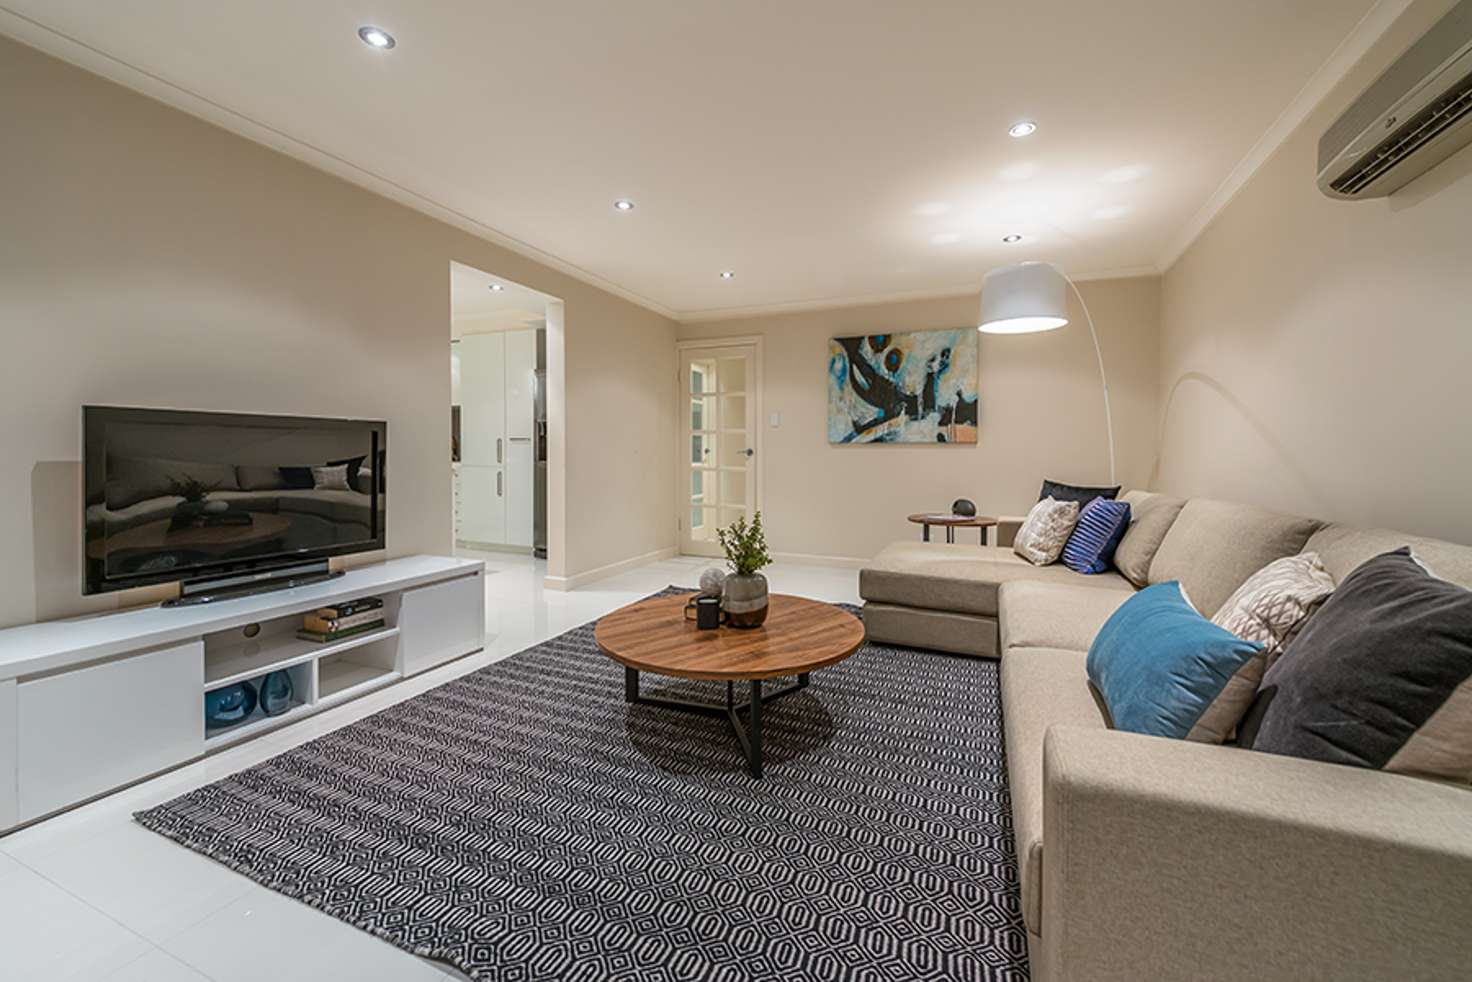 Main view of Homely apartment listing, 5/26 St Leonards Avenue, West Leederville WA 6007